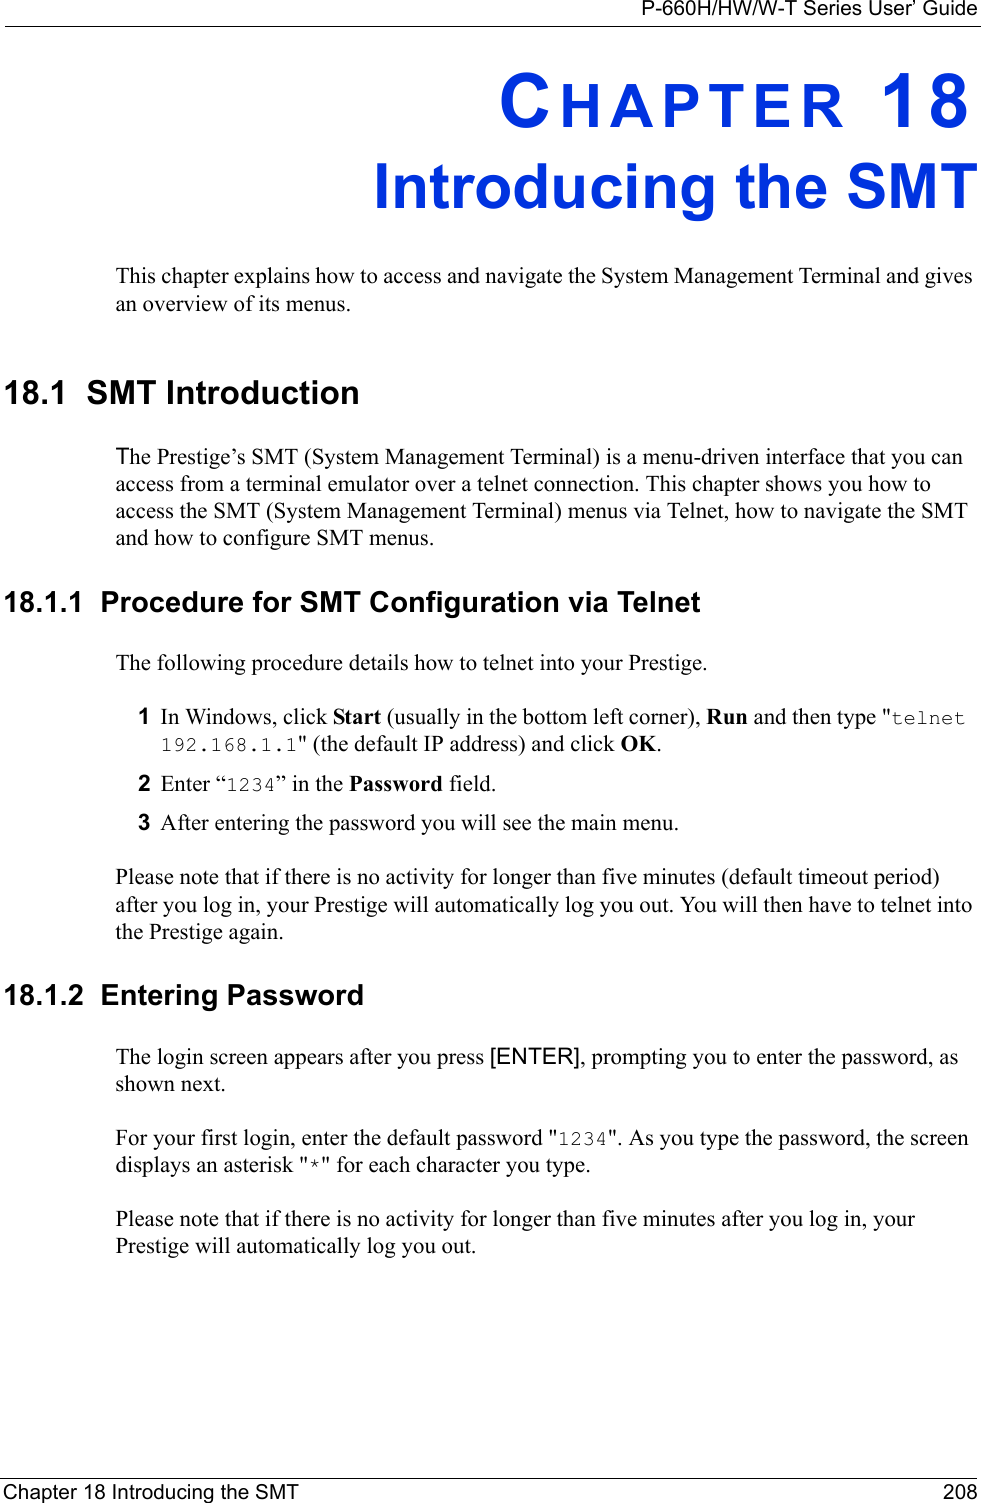 P-660H/HW/W-T Series User’ GuideChapter 18 Introducing the SMT 208CHAPTER 18Introducing the SMTThis chapter explains how to access and navigate the System Management Terminal and gives an overview of its menus.18.1  SMT IntroductionThe Prestige’s SMT (System Management Terminal) is a menu-driven interface that you can access from a terminal emulator over a telnet connection. This chapter shows you how to access the SMT (System Management Terminal) menus via Telnet, how to navigate the SMT and how to configure SMT menus.18.1.1  Procedure for SMT Configuration via TelnetThe following procedure details how to telnet into your Prestige.1In Windows, click Start (usually in the bottom left corner), Run and then type &quot;telnet 192.168.1.1&quot; (the default IP address) and click OK. 2Enter “1234” in the Password field. 3After entering the password you will see the main menu.Please note that if there is no activity for longer than five minutes (default timeout period) after you log in, your Prestige will automatically log you out. You will then have to telnet into the Prestige again.18.1.2  Entering PasswordThe login screen appears after you press [ENTER], prompting you to enter the password, as shown next.For your first login, enter the default password &quot;1234&quot;. As you type the password, the screen displays an asterisk &quot;*&quot; for each character you type.Please note that if there is no activity for longer than five minutes after you log in, your Prestige will automatically log you out. 